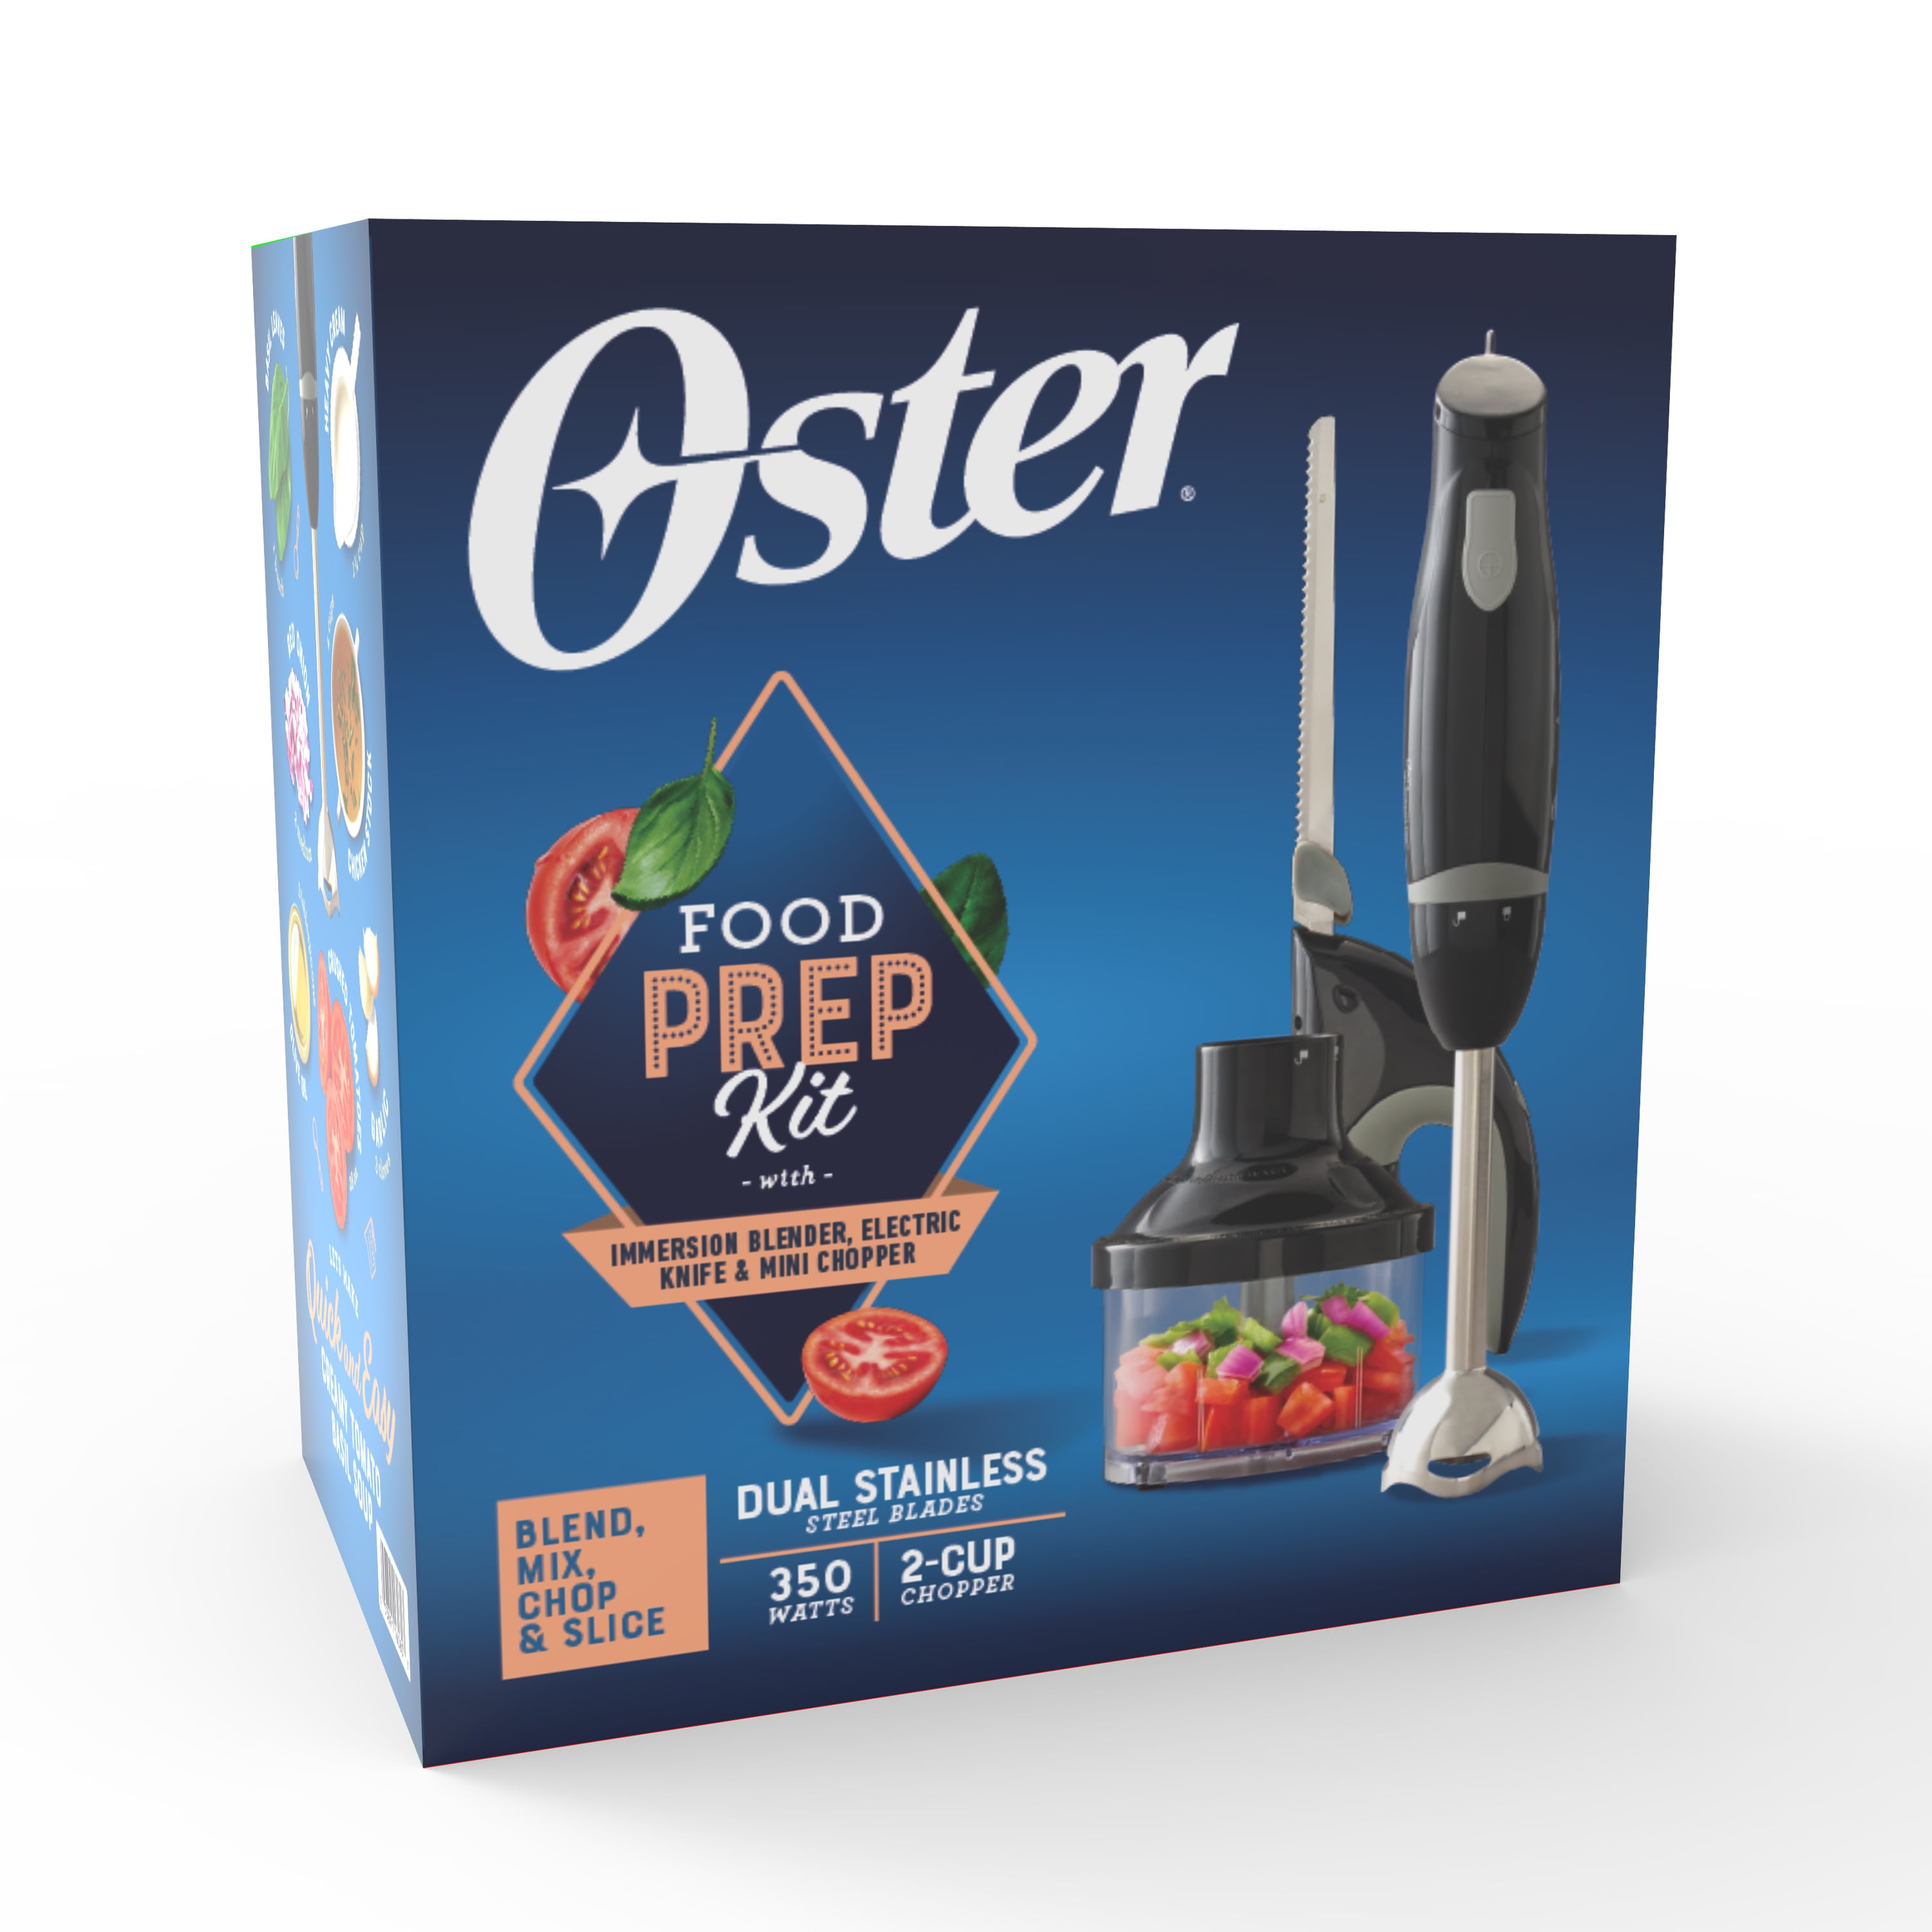 Oster Food Prep Kit Small Kitchen Appliance With Immersion Hand Blender,  Electric Knife, And 2 Cup Mini Food Vegetable Chopper, Black : Target